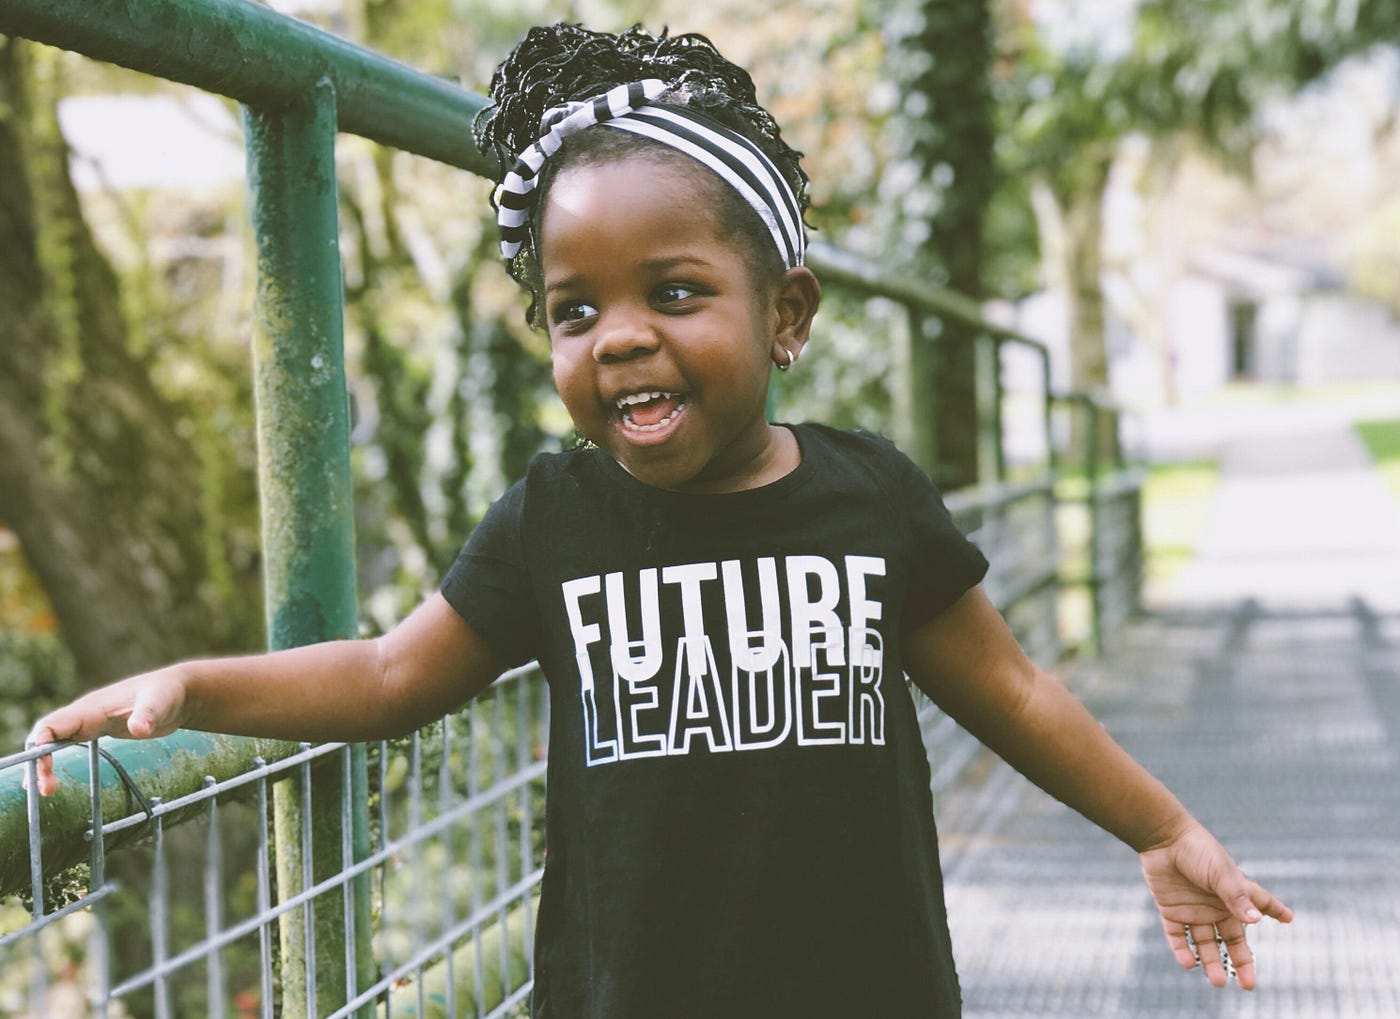 Excited adorable kid, with brown skin and black braids in a striped headband, in a “Future Leader” shirt, on a little bridge